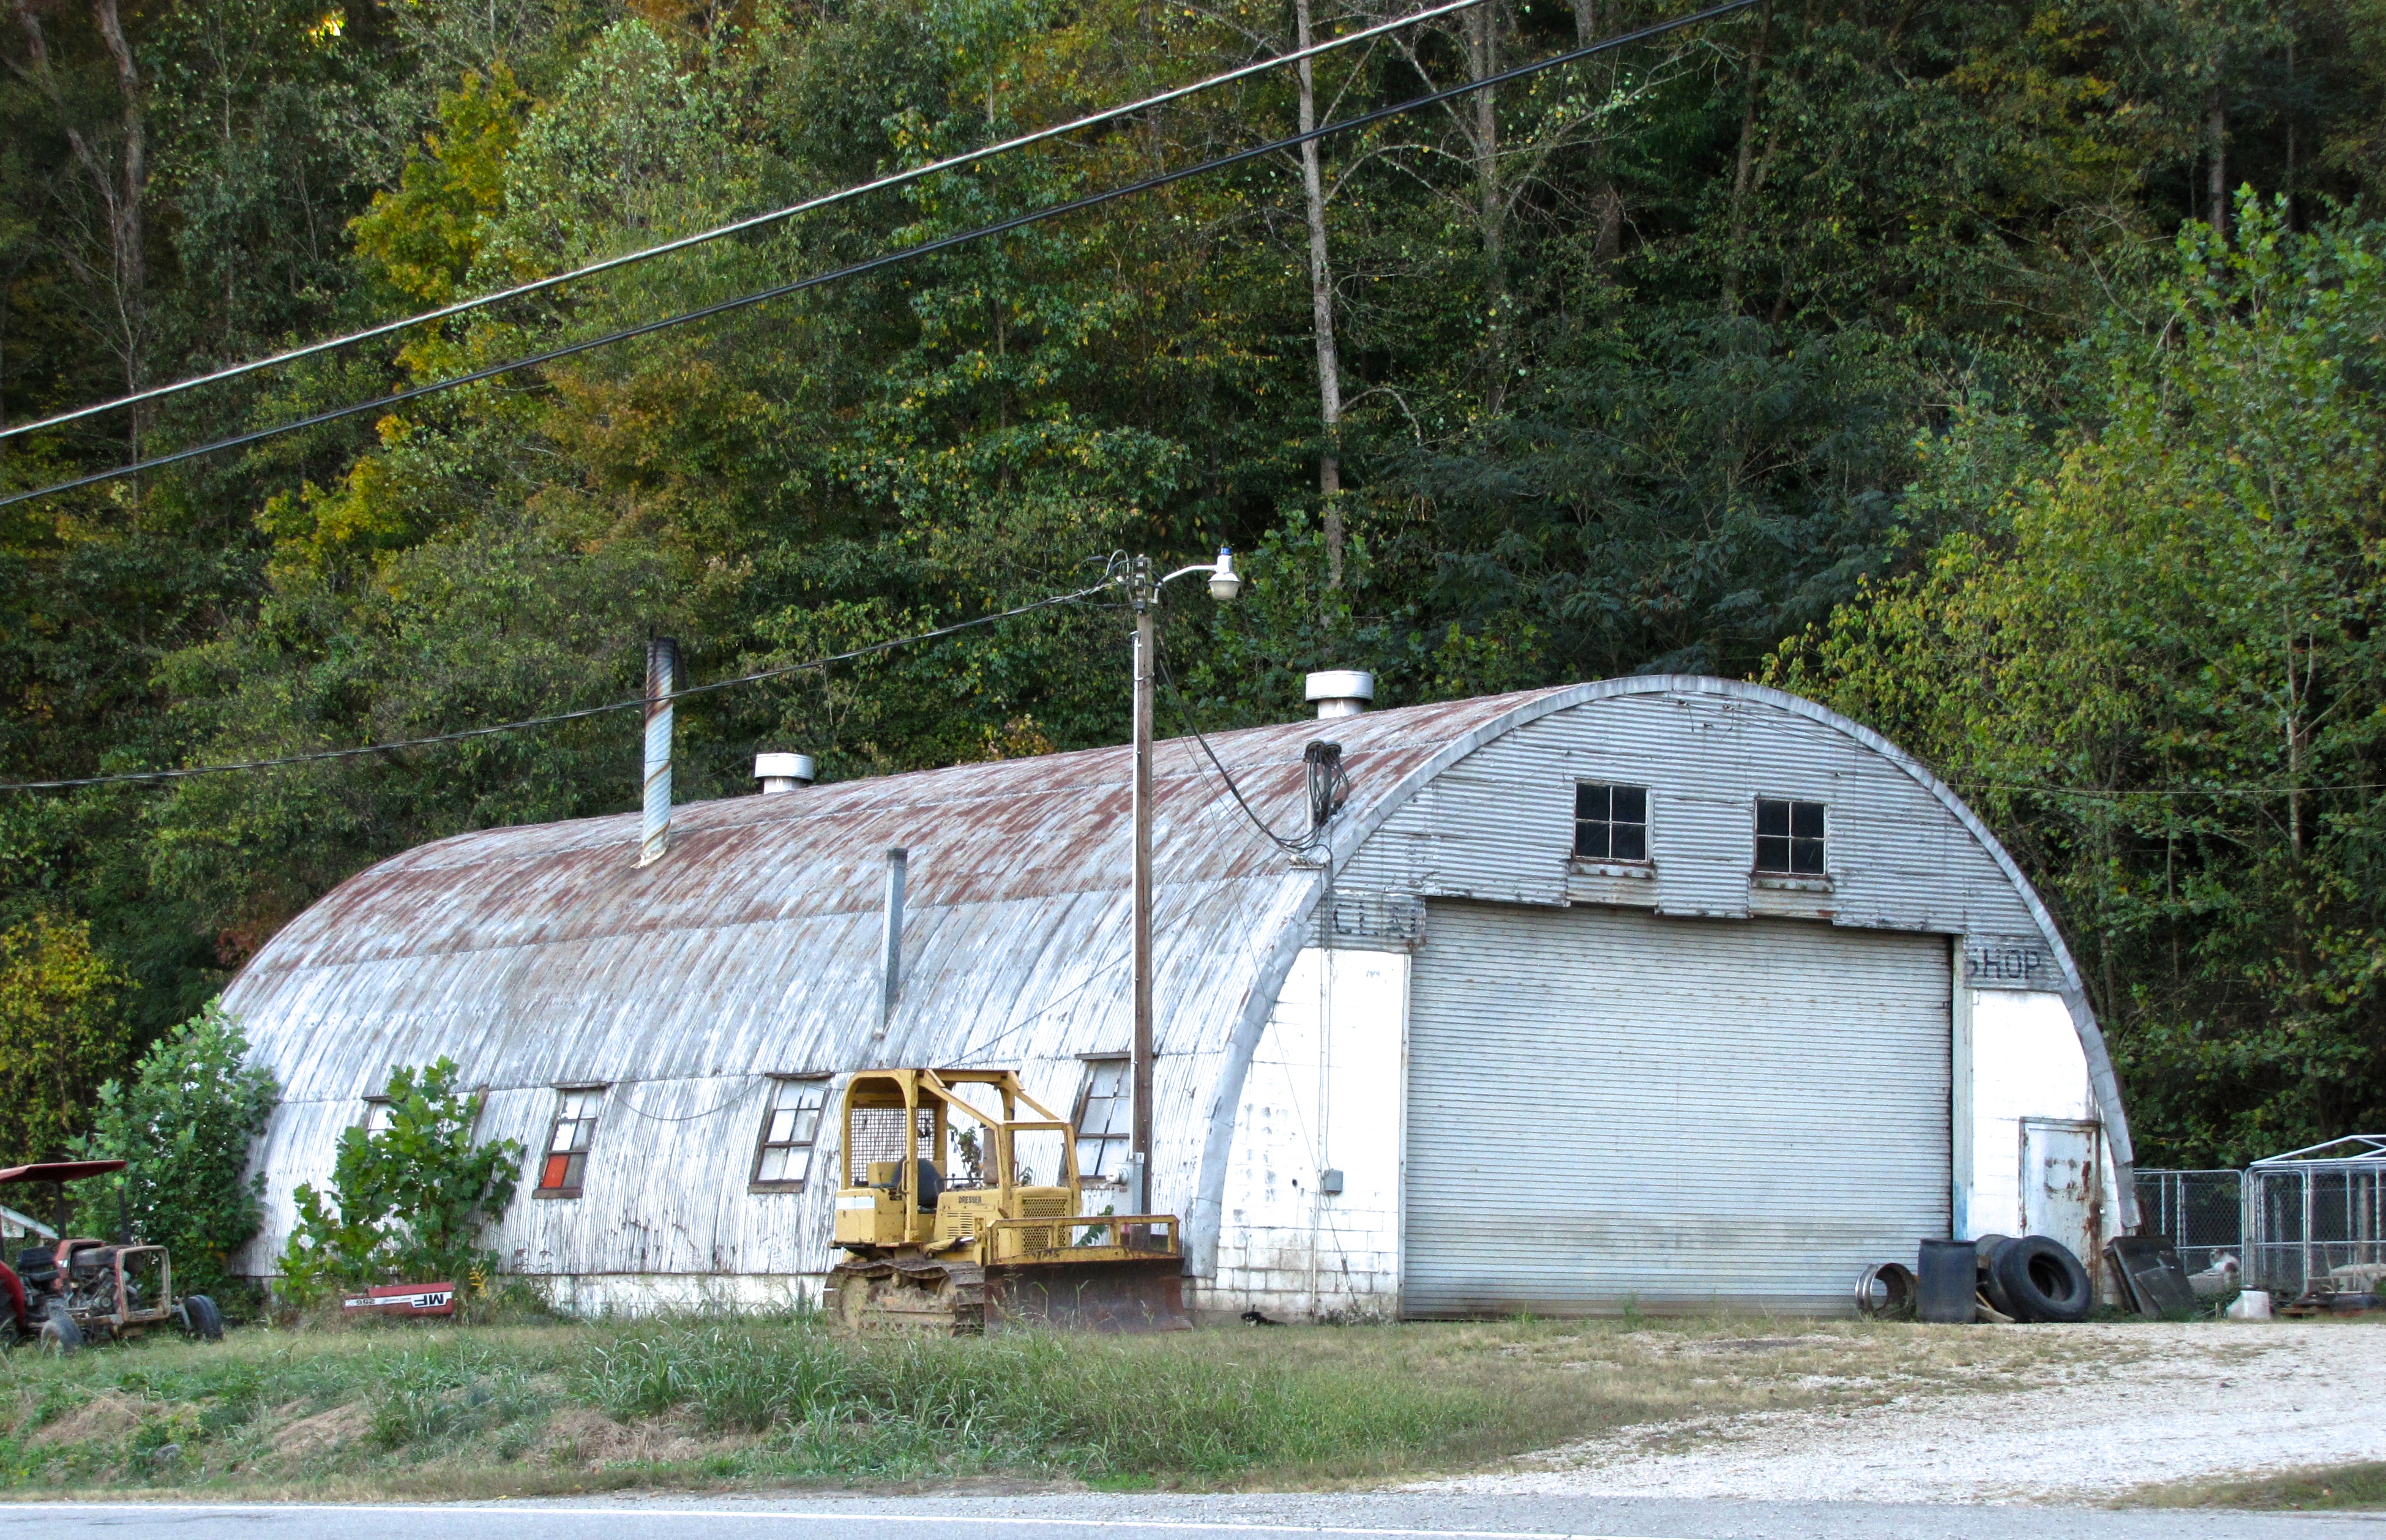 quonset hut in Privacy Policy, TN